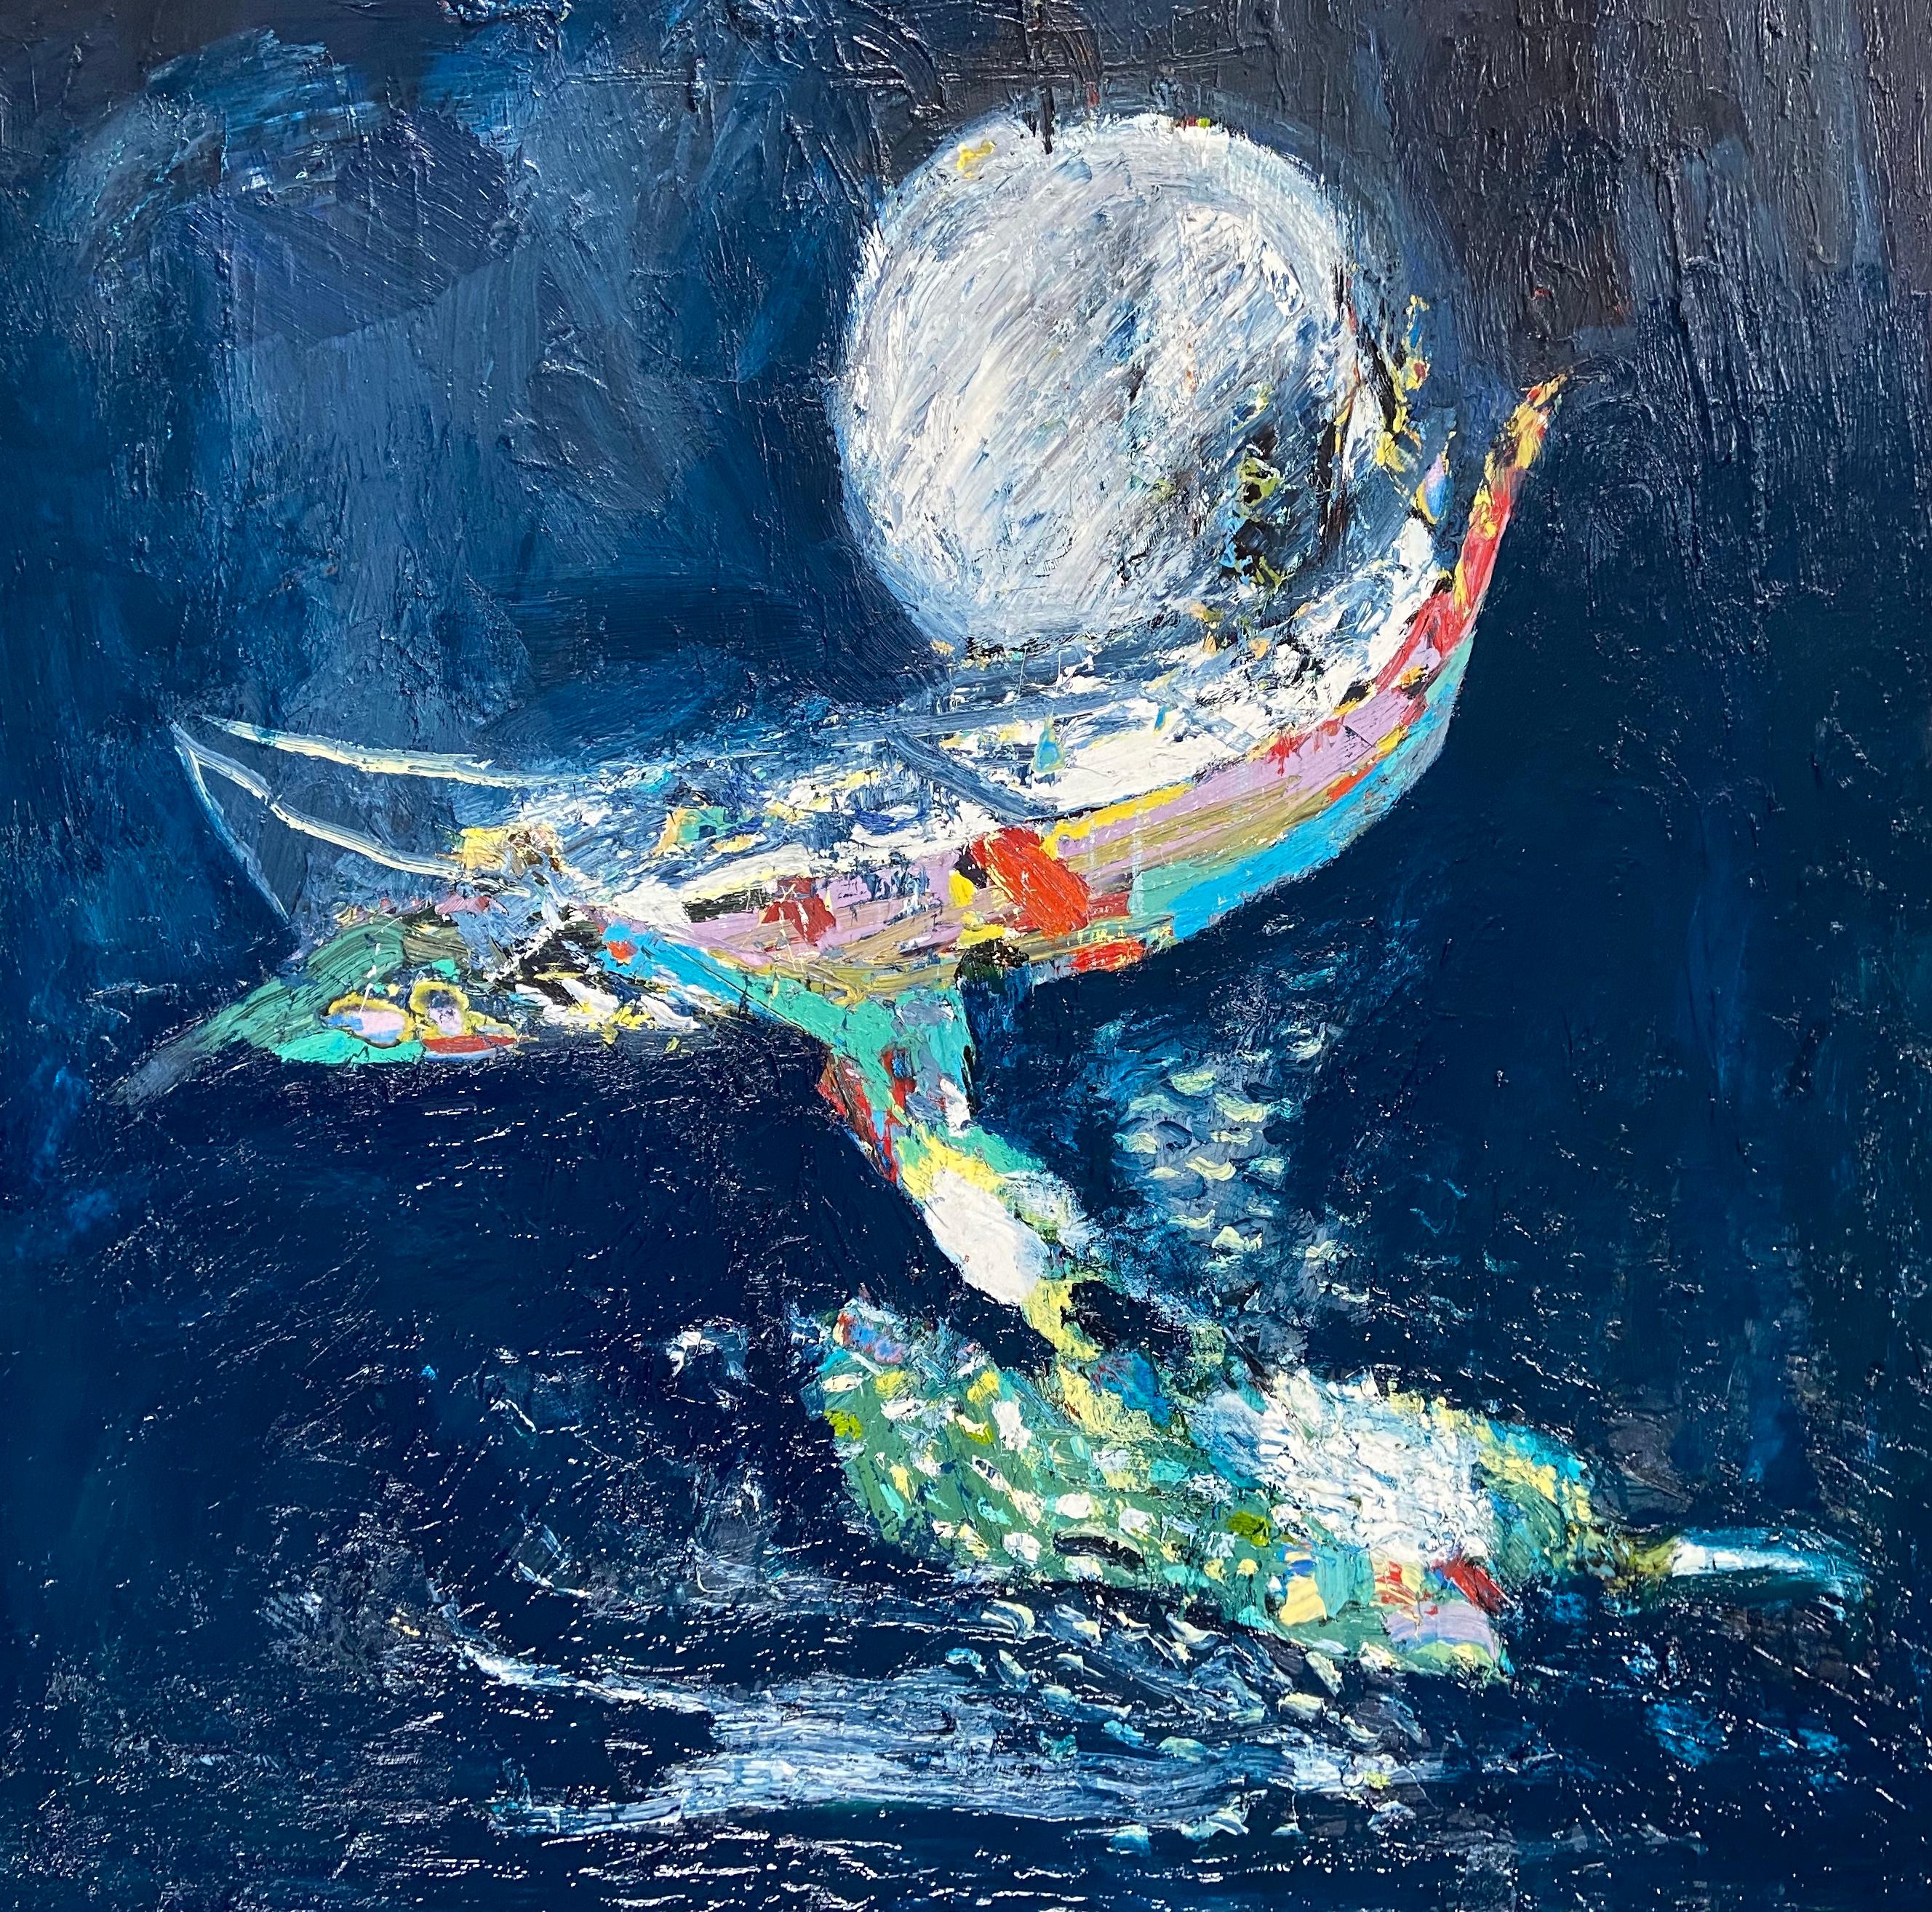 Paul wadsworth Figurative Painting - Moonlight Swimmer.  Contemporary Abstract Expressionist Oil Painting